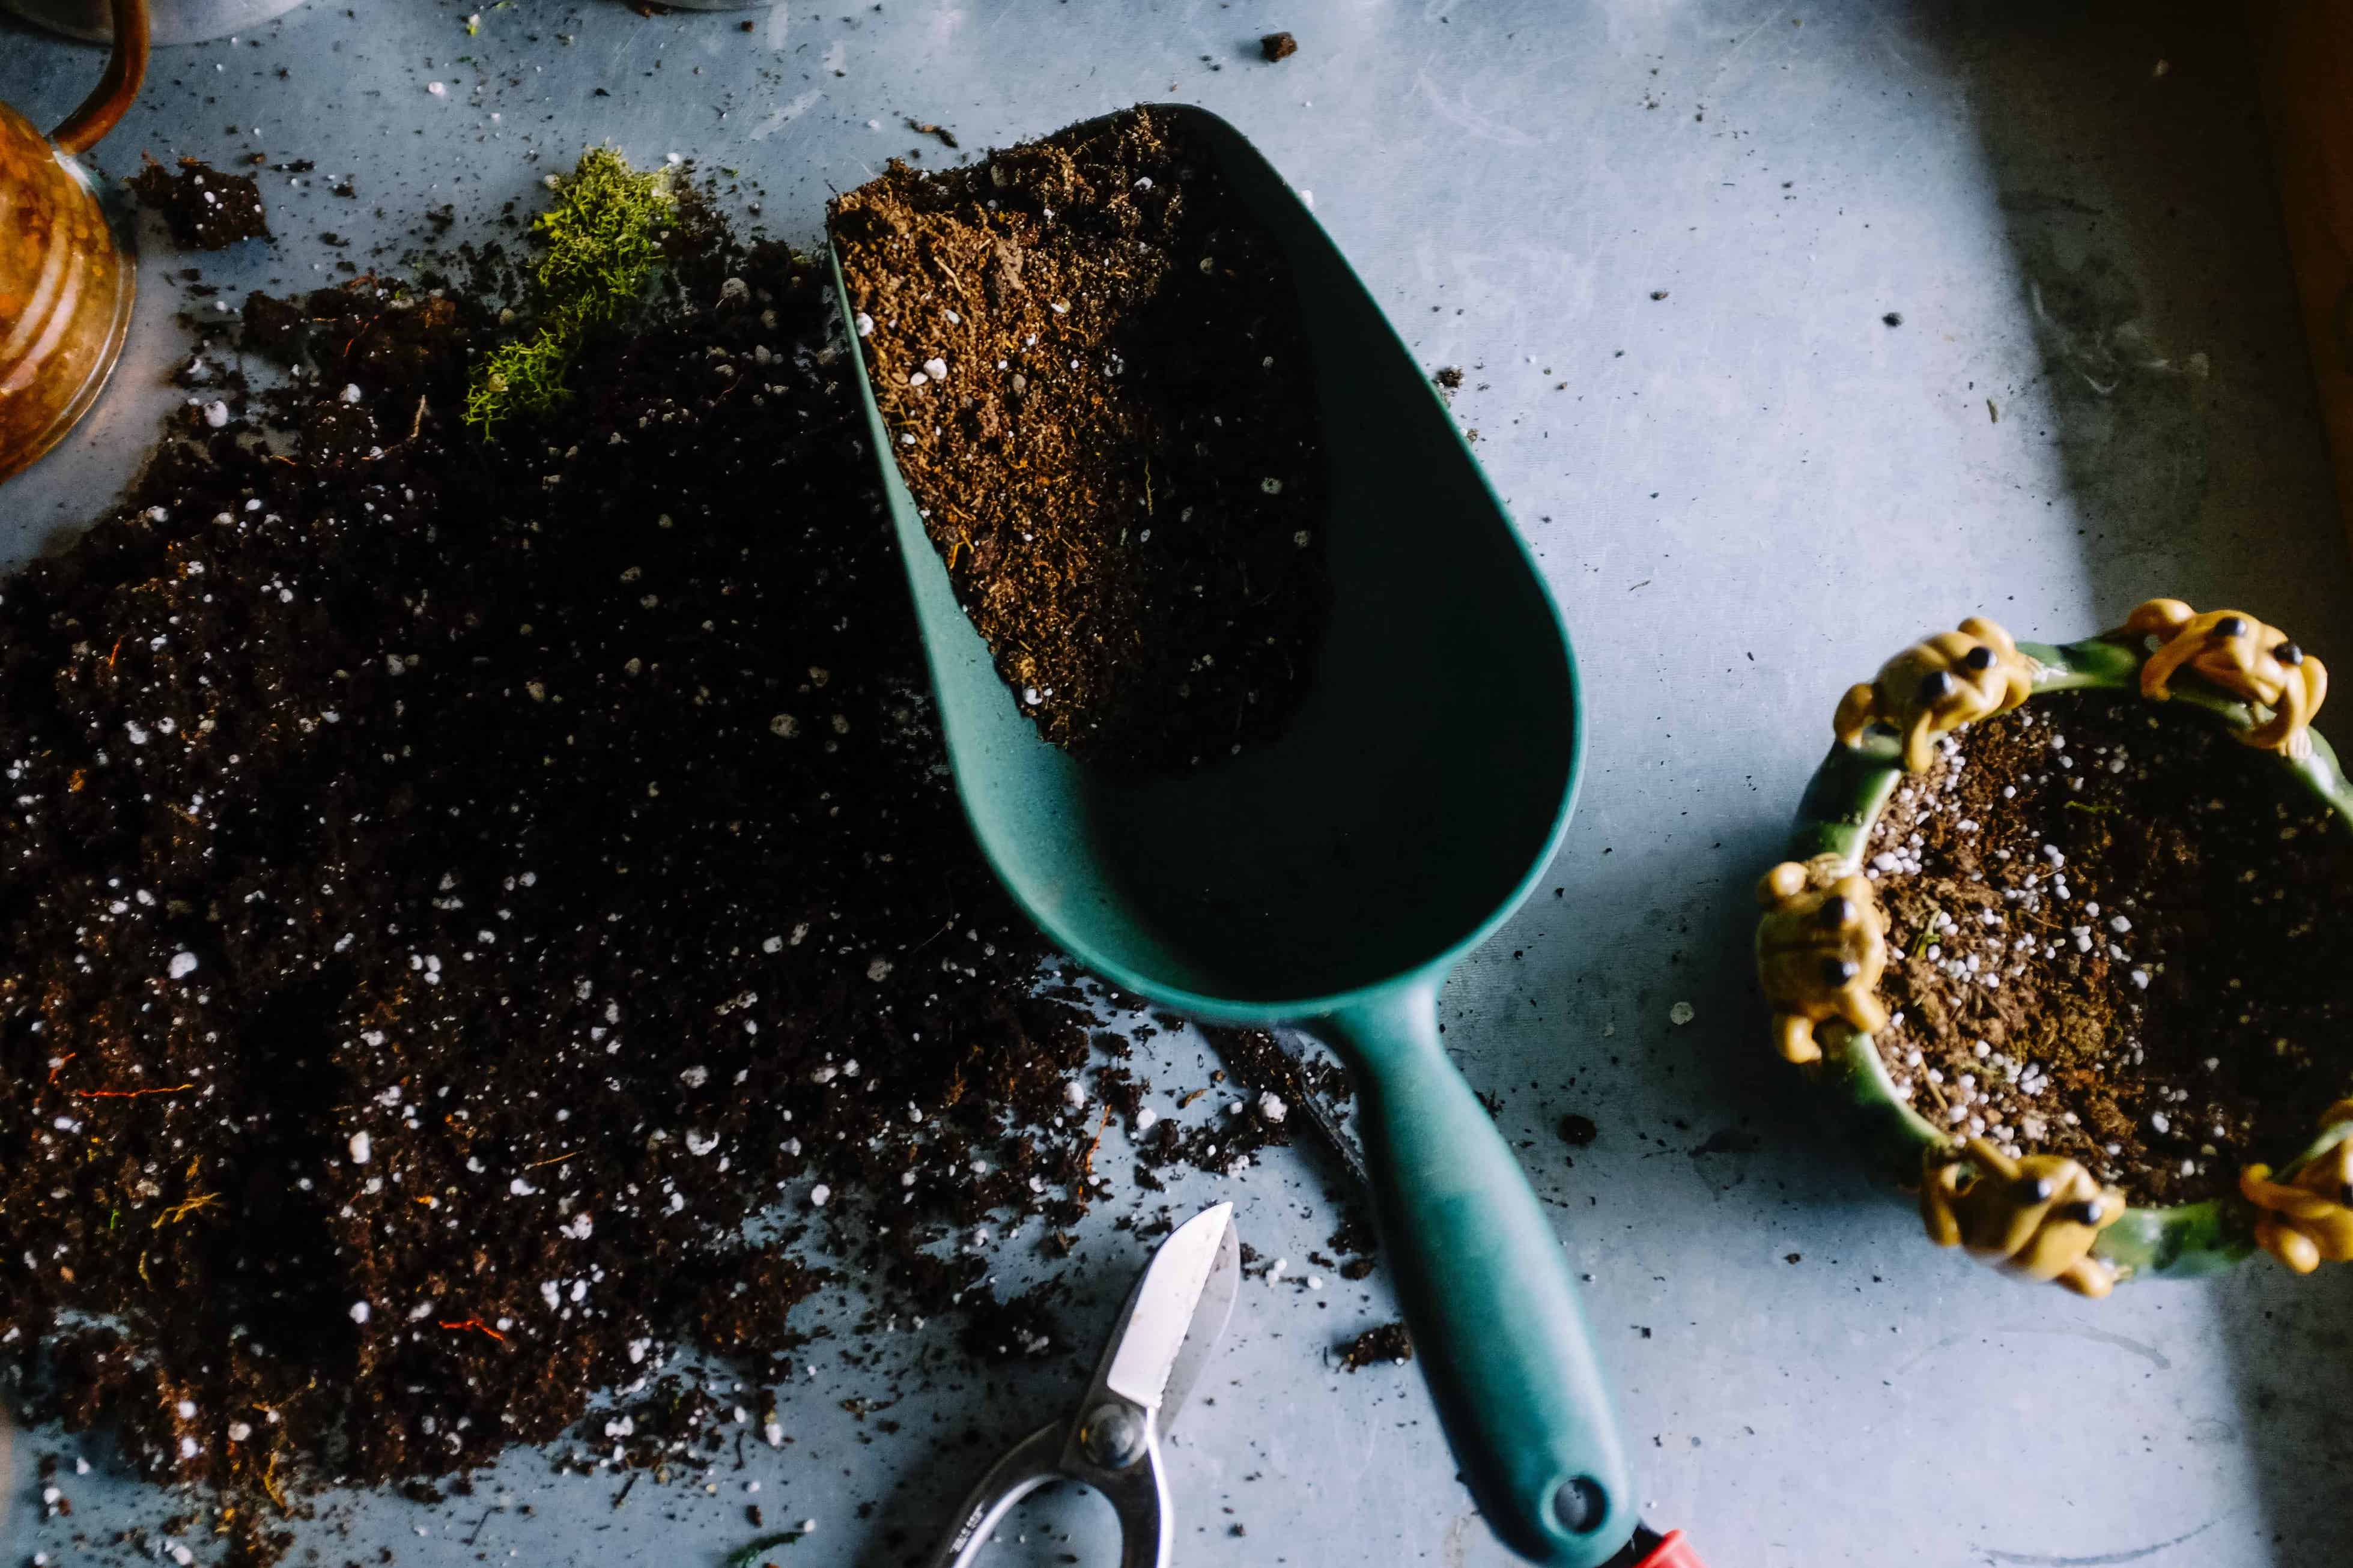 How to Compost in an Apartment (Without Worms!)